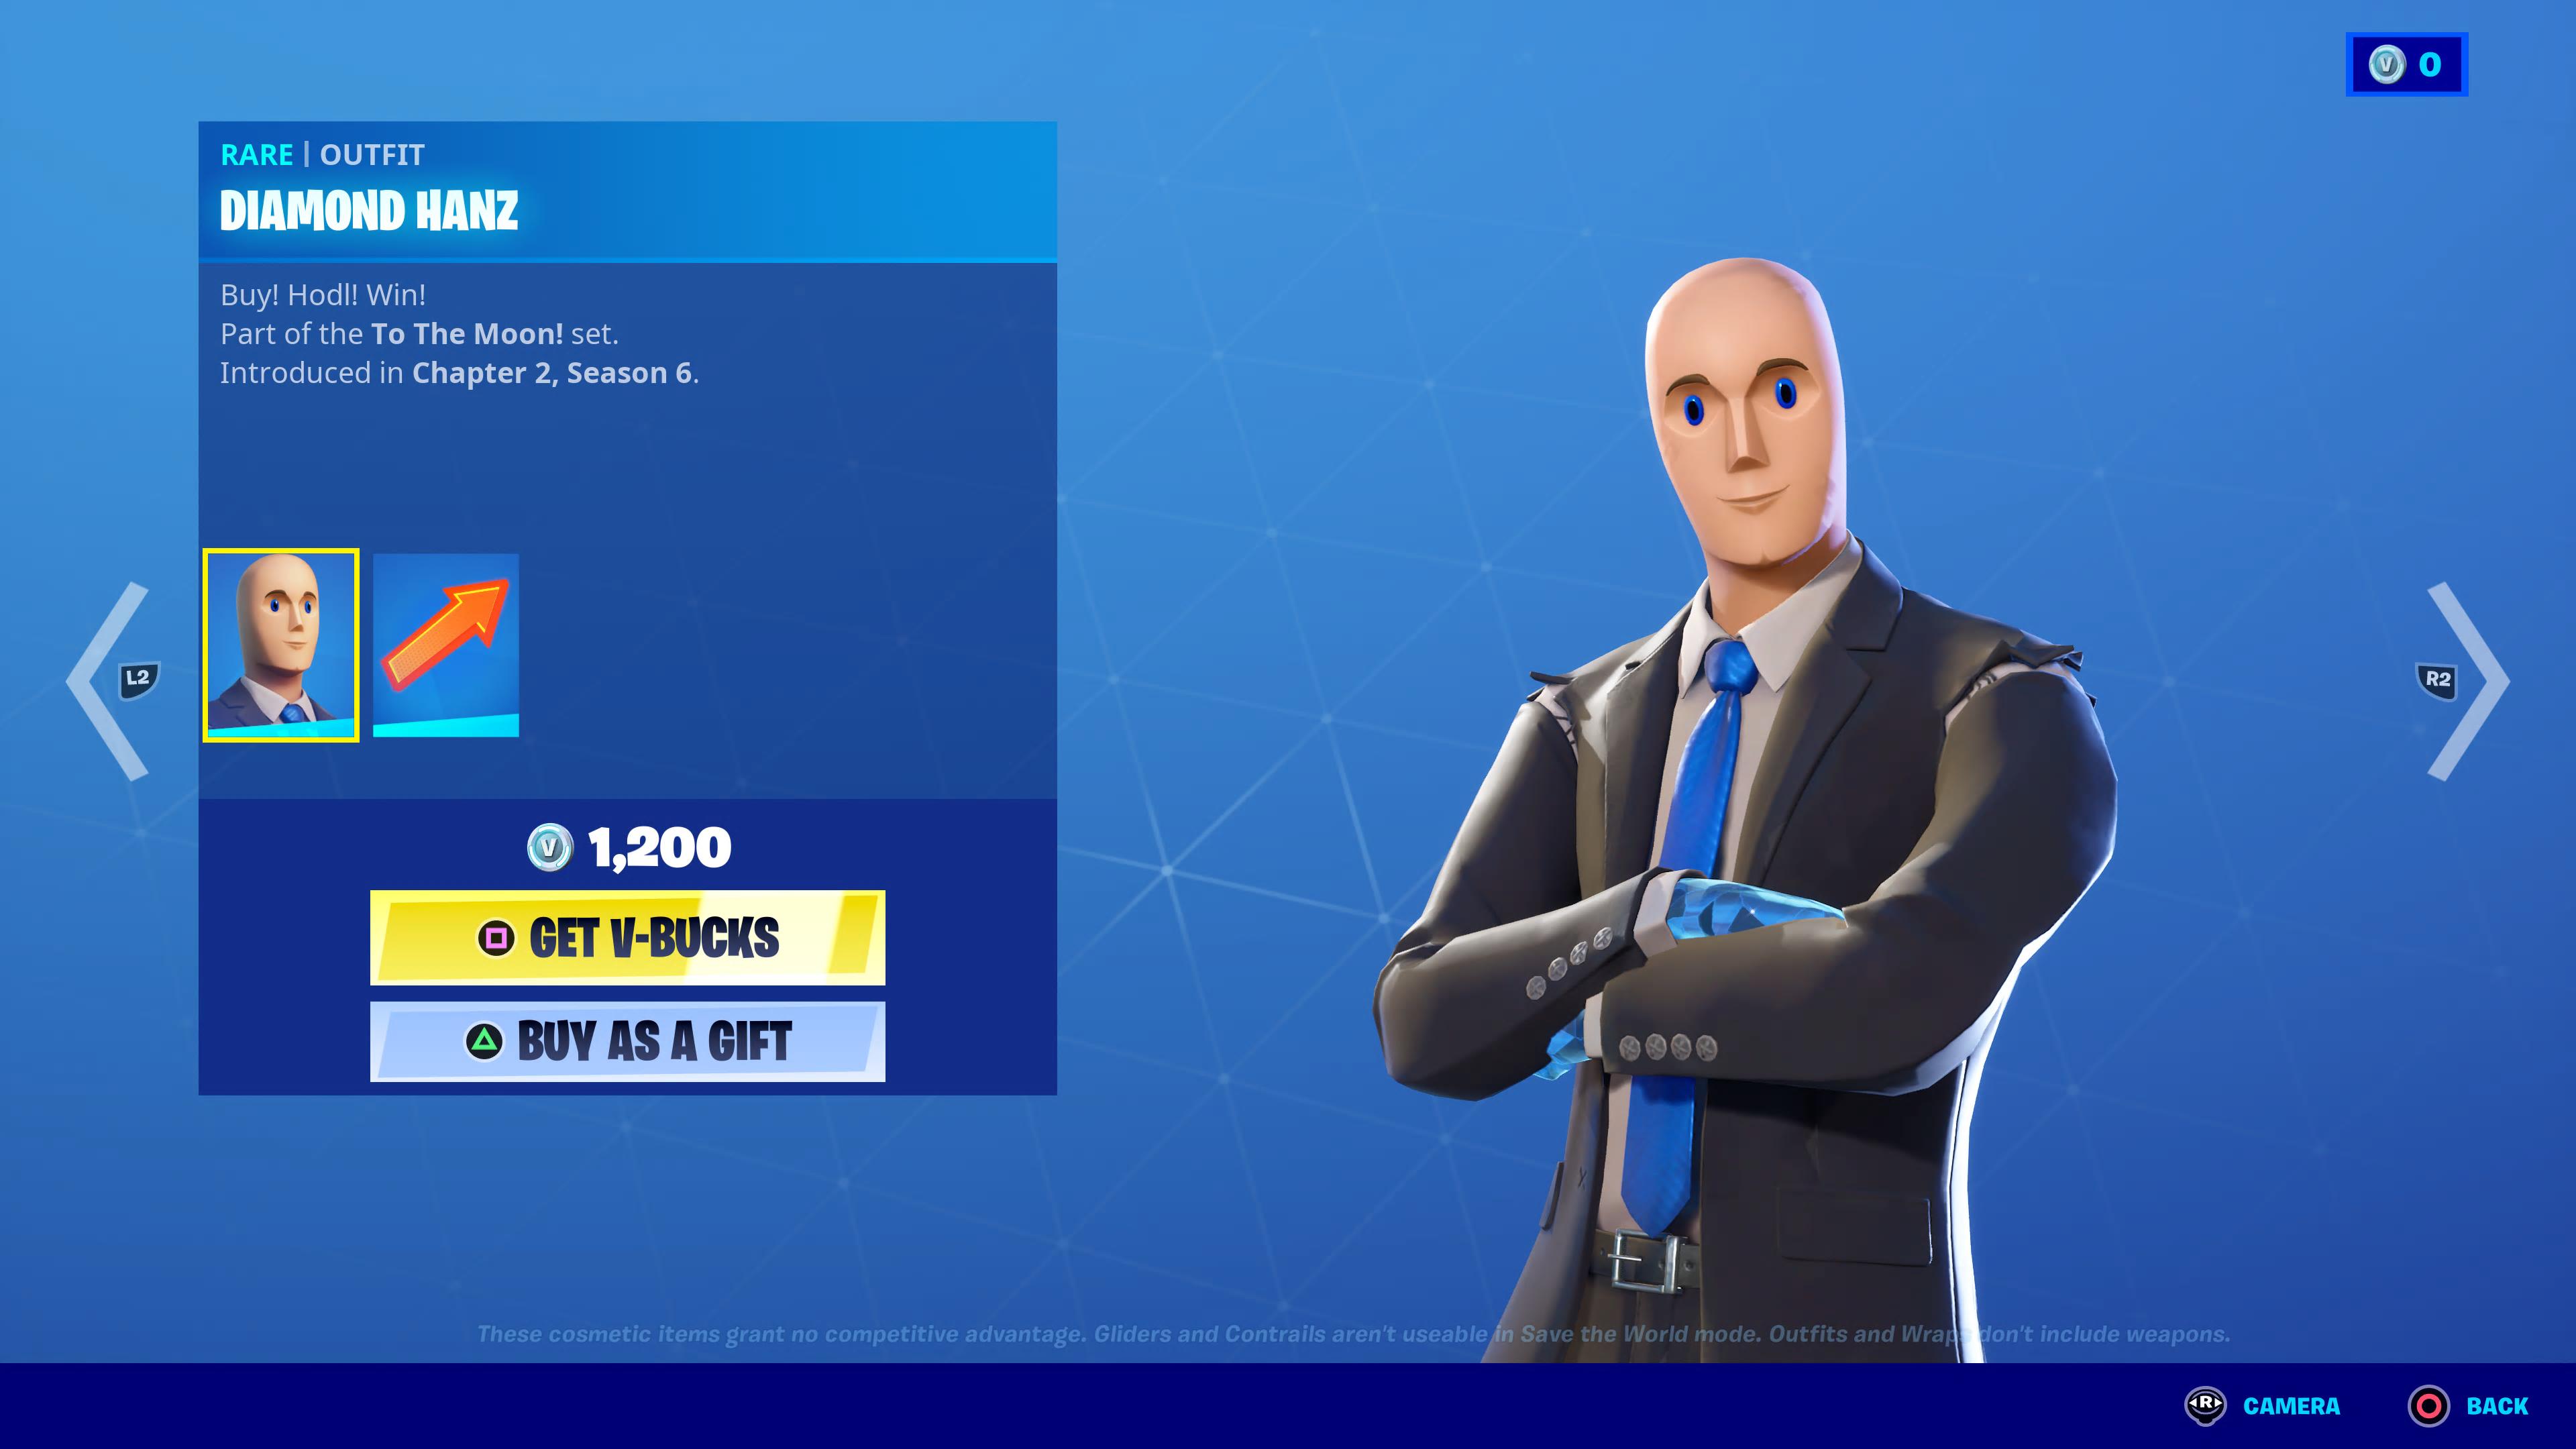 Fortnite marketplace showing “Diamond Hanz,” who is based on the STONKS! meme